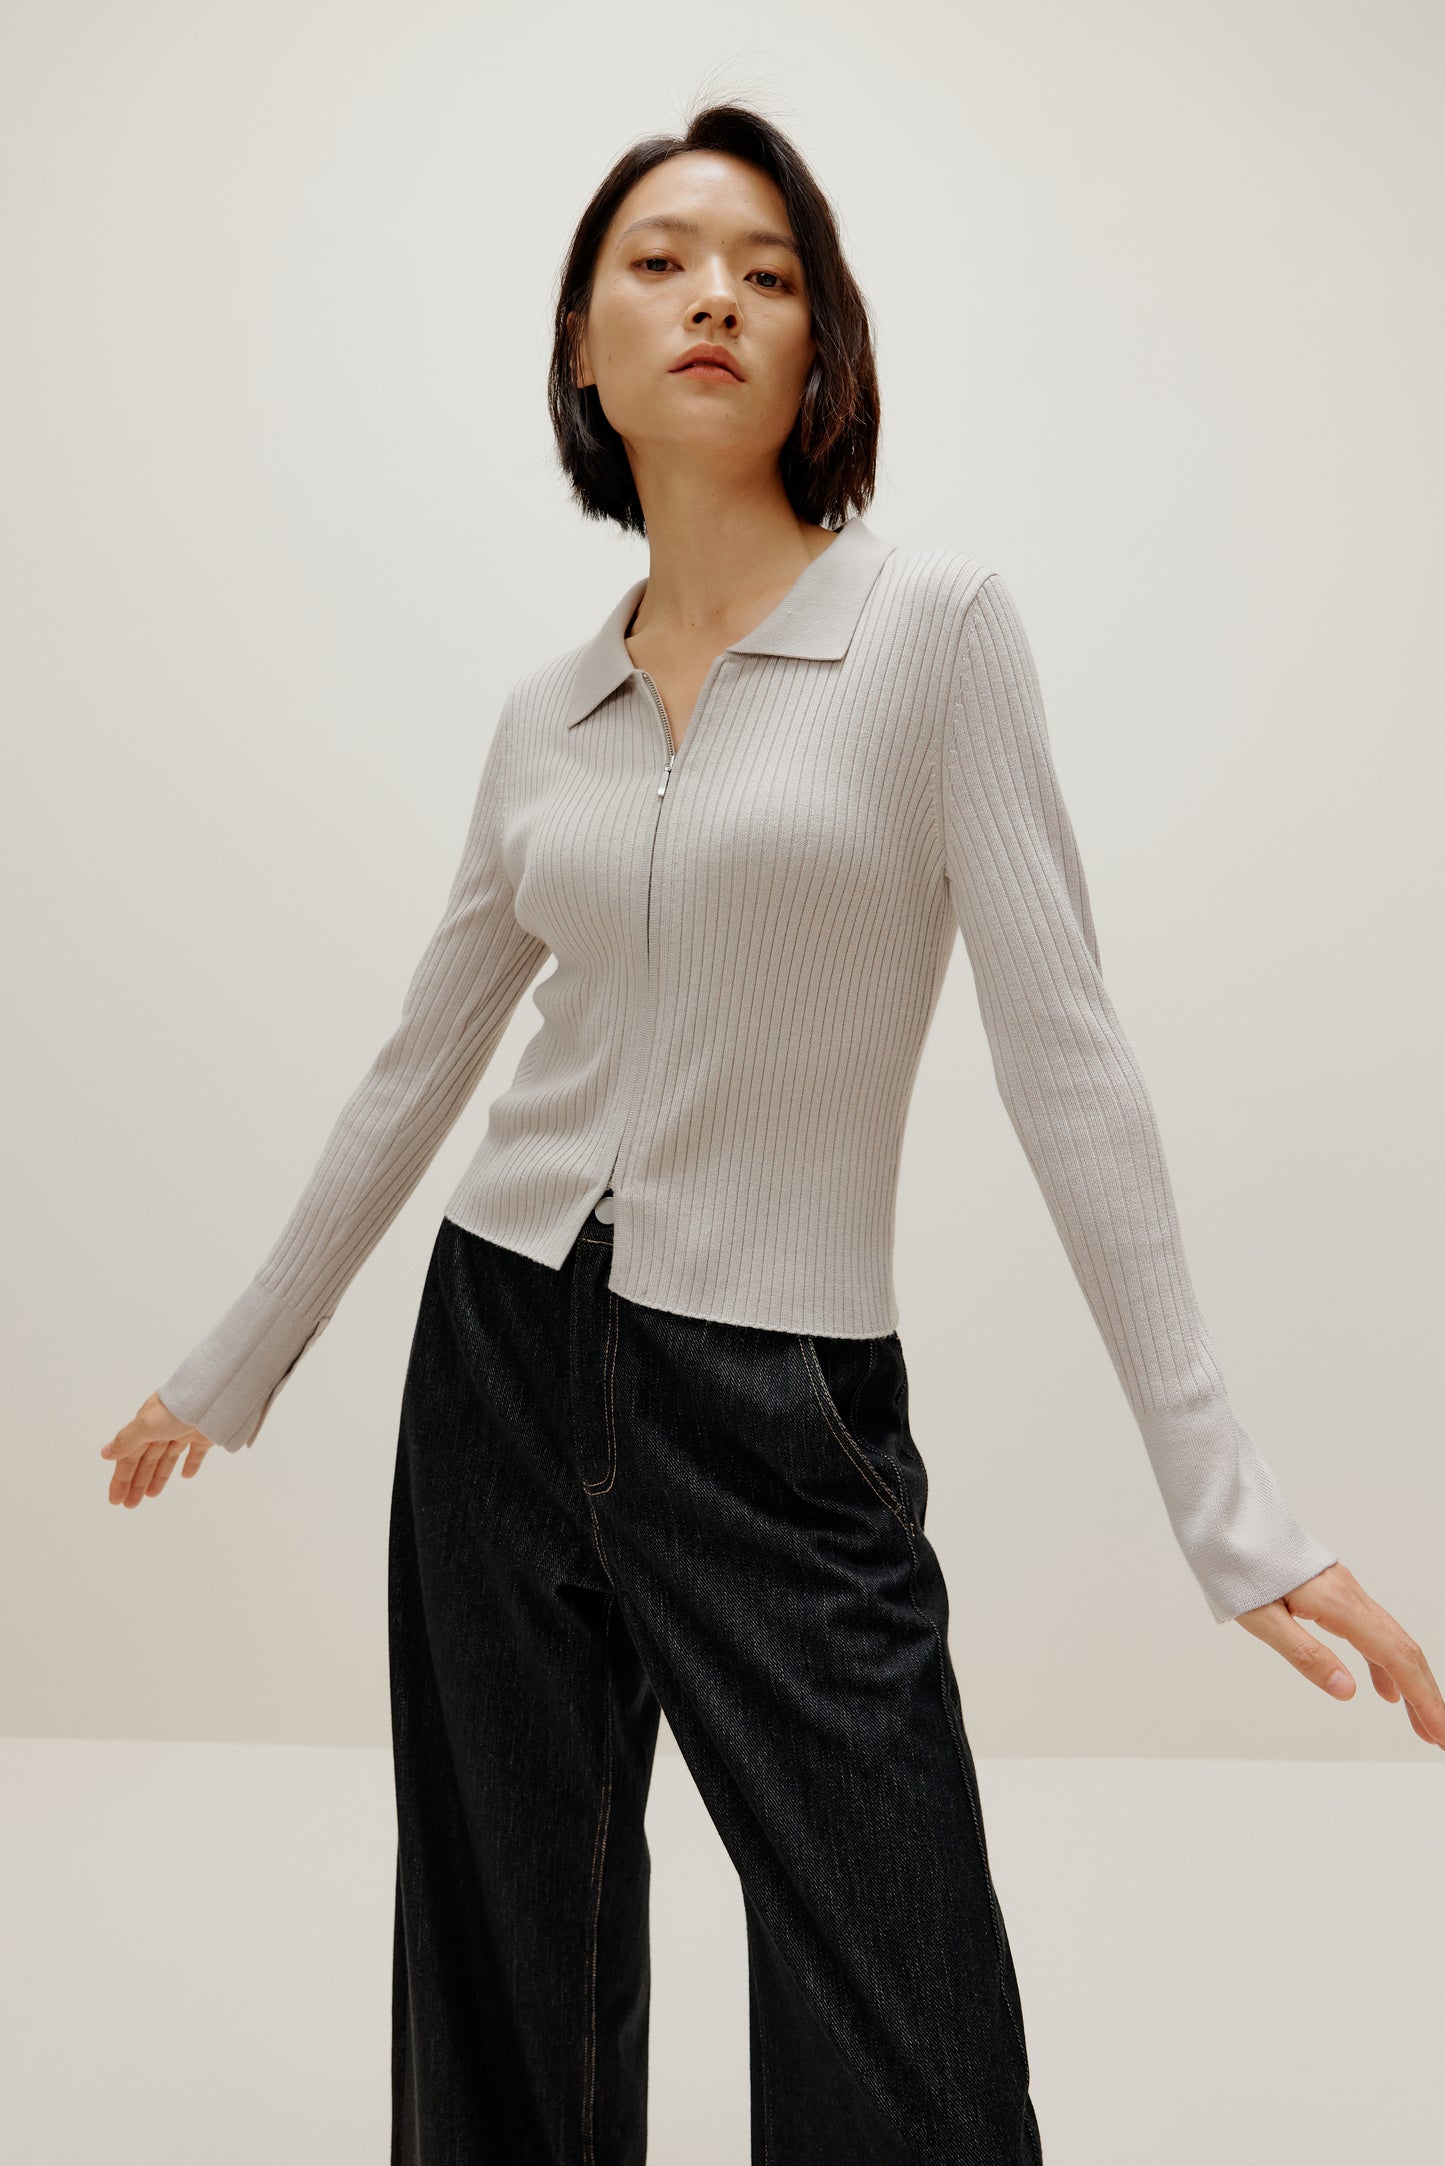 A woman wears a gray silky wool zip-up cardigan and black pants.